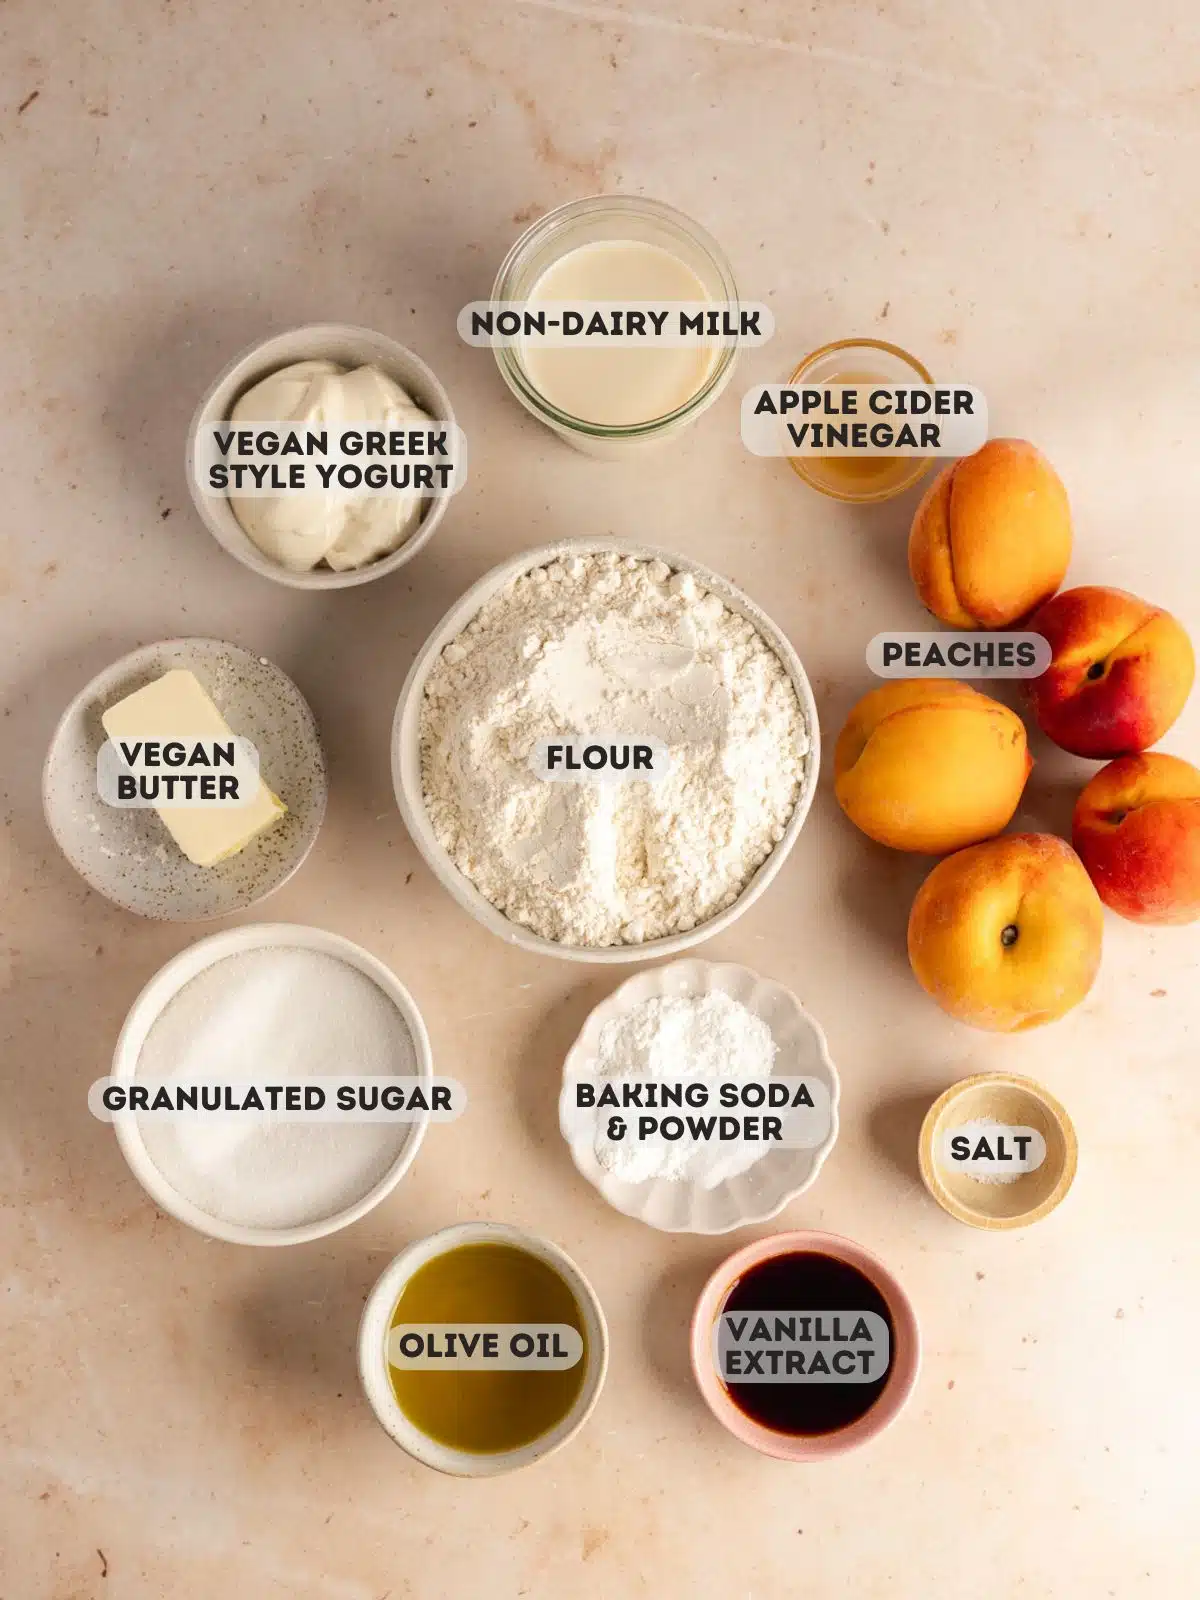 ingredients to make peach cobbler muffins measured out in bowls on a peach colored surface.